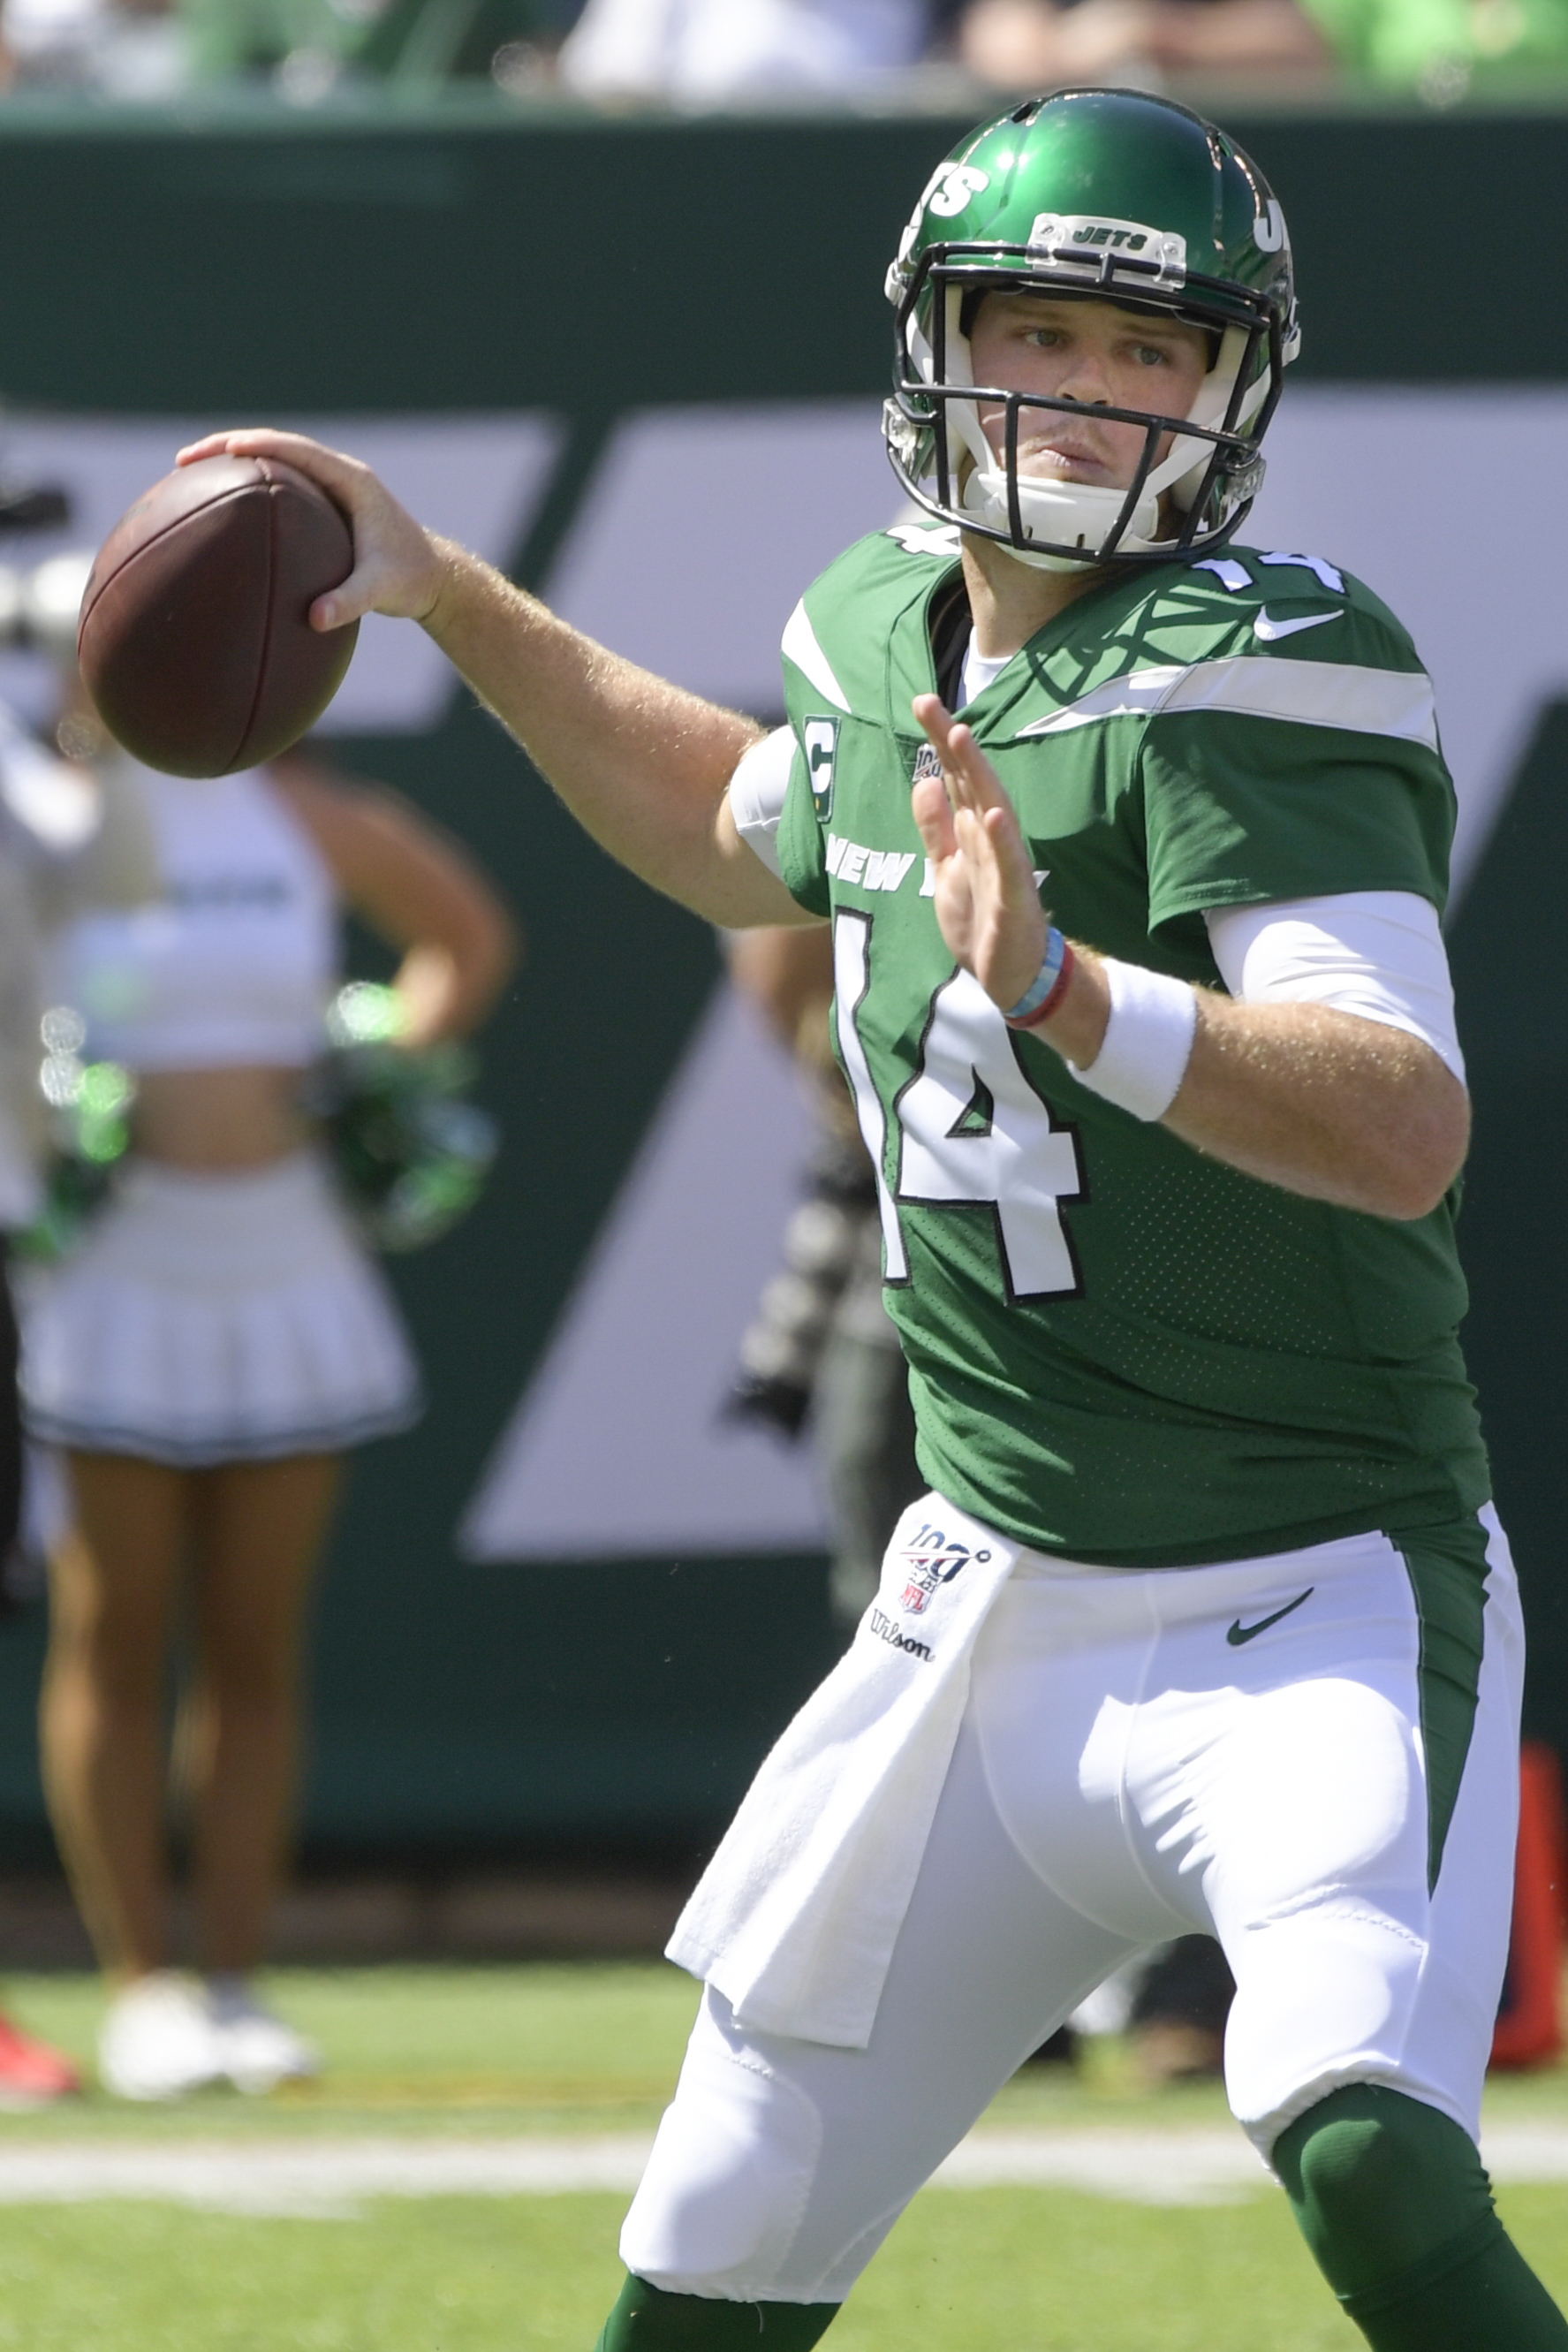 Jets' Darnold hopes to return to field in Week 5 vs. Eagles